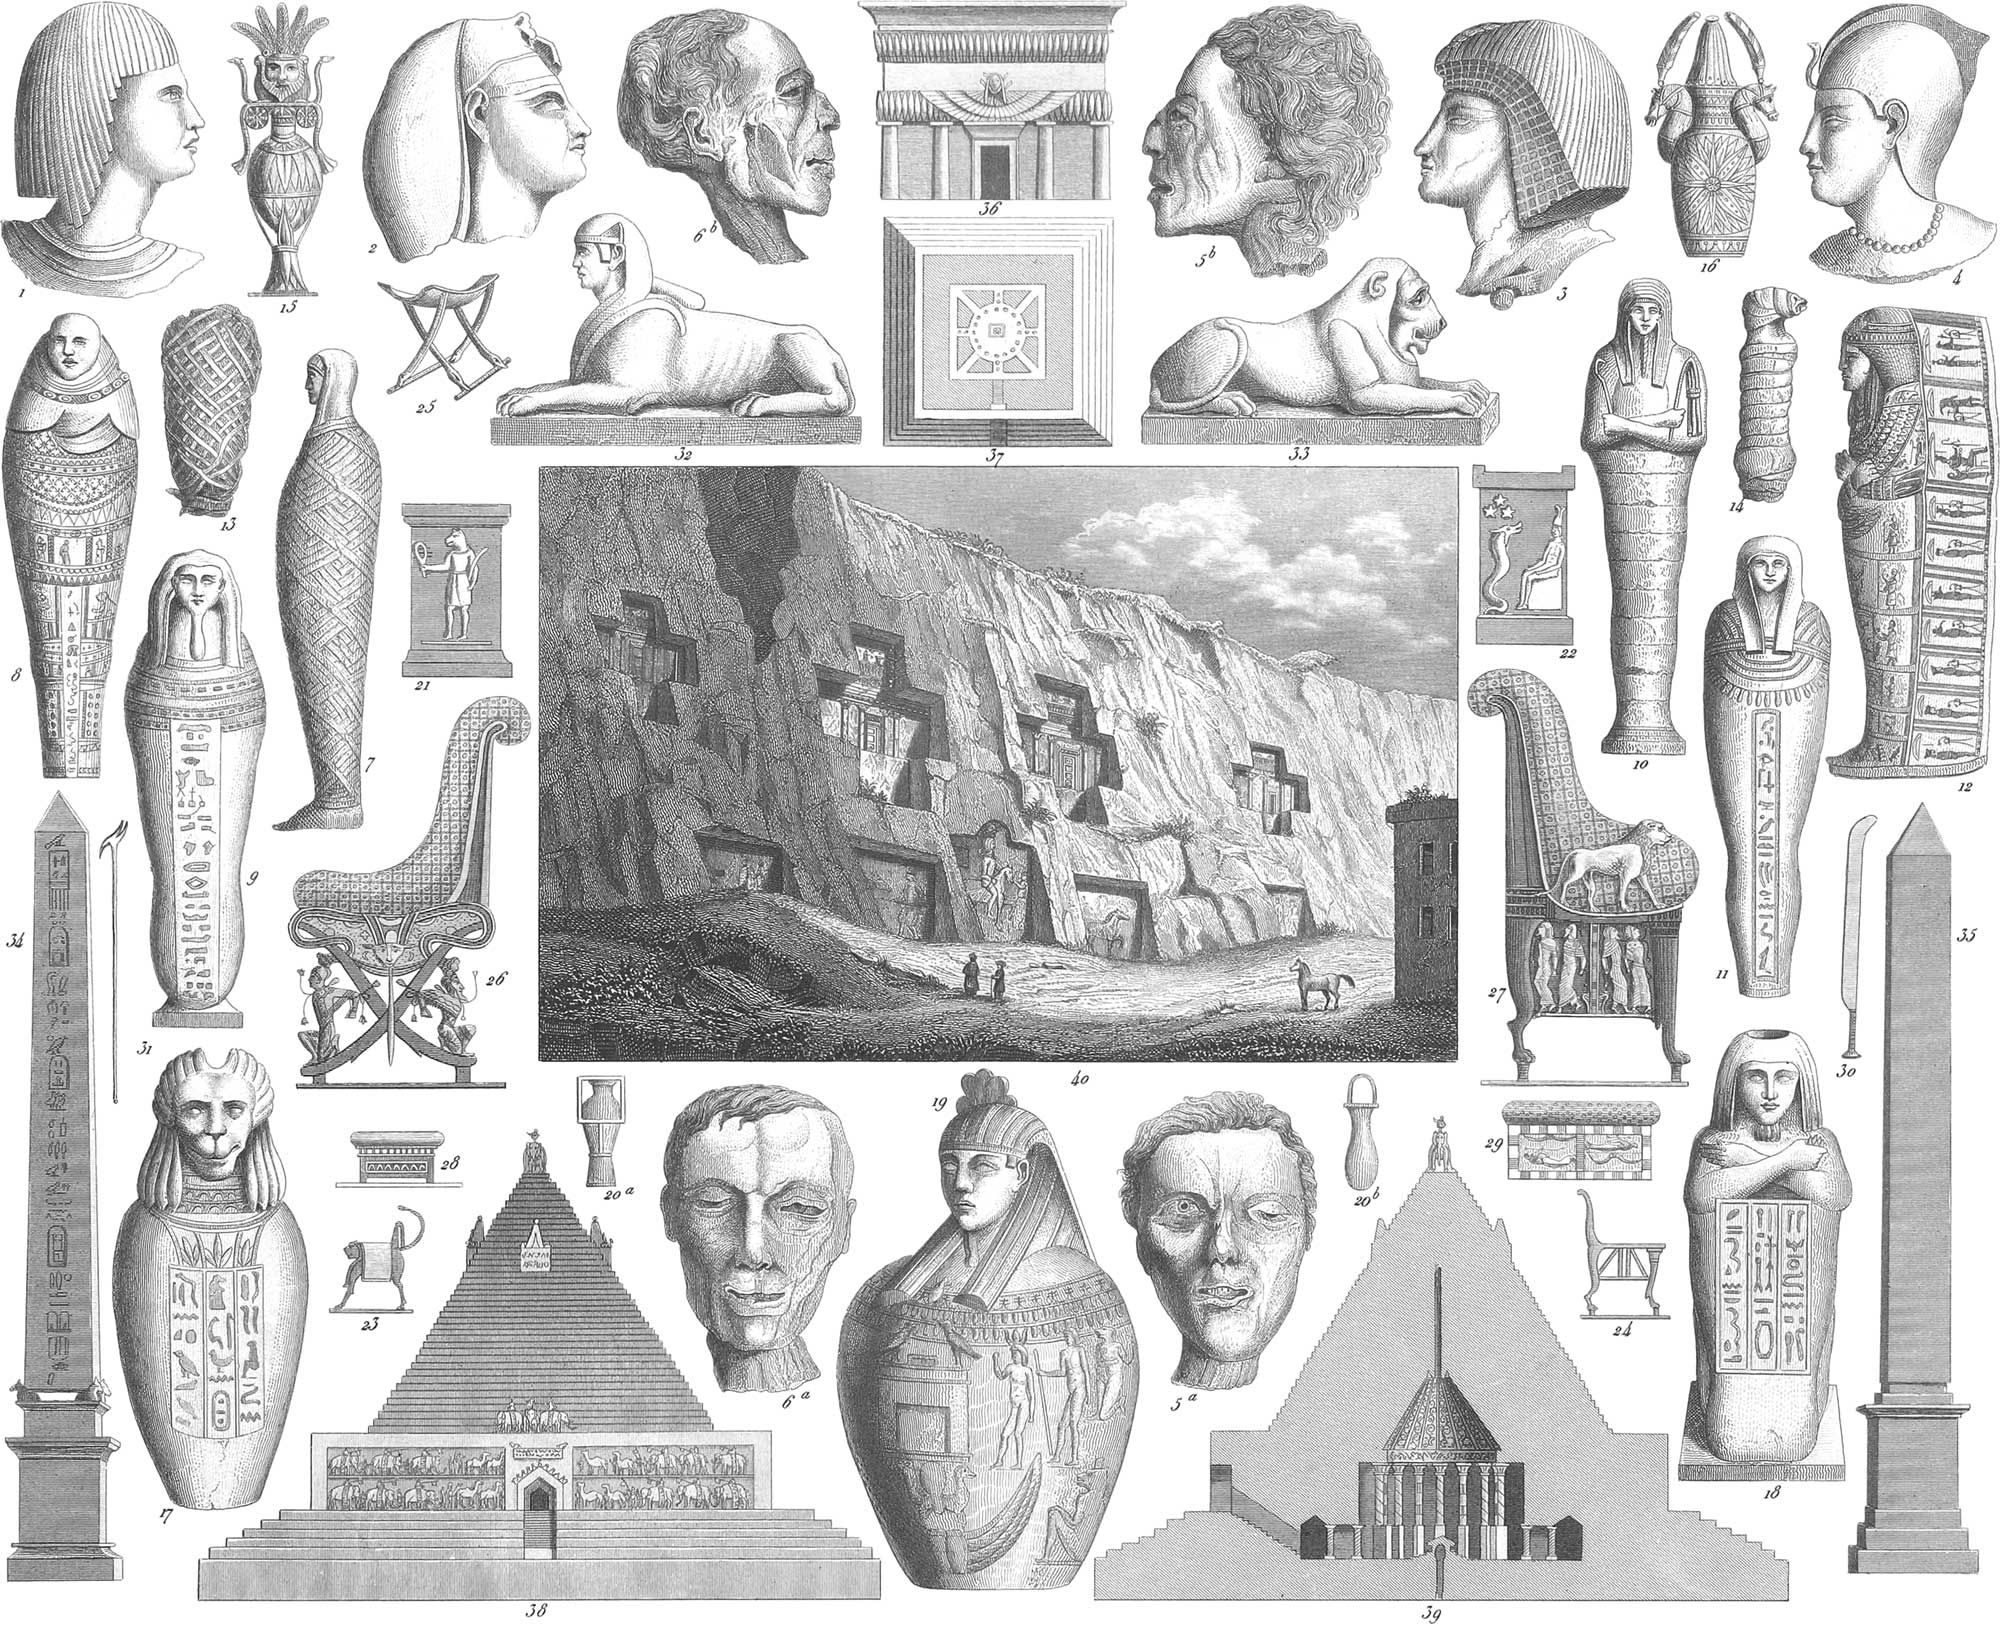 https://www.c82.net/images/iconography/history-ethnology/plate-3-iii/plate-3-iii-preview.jpg